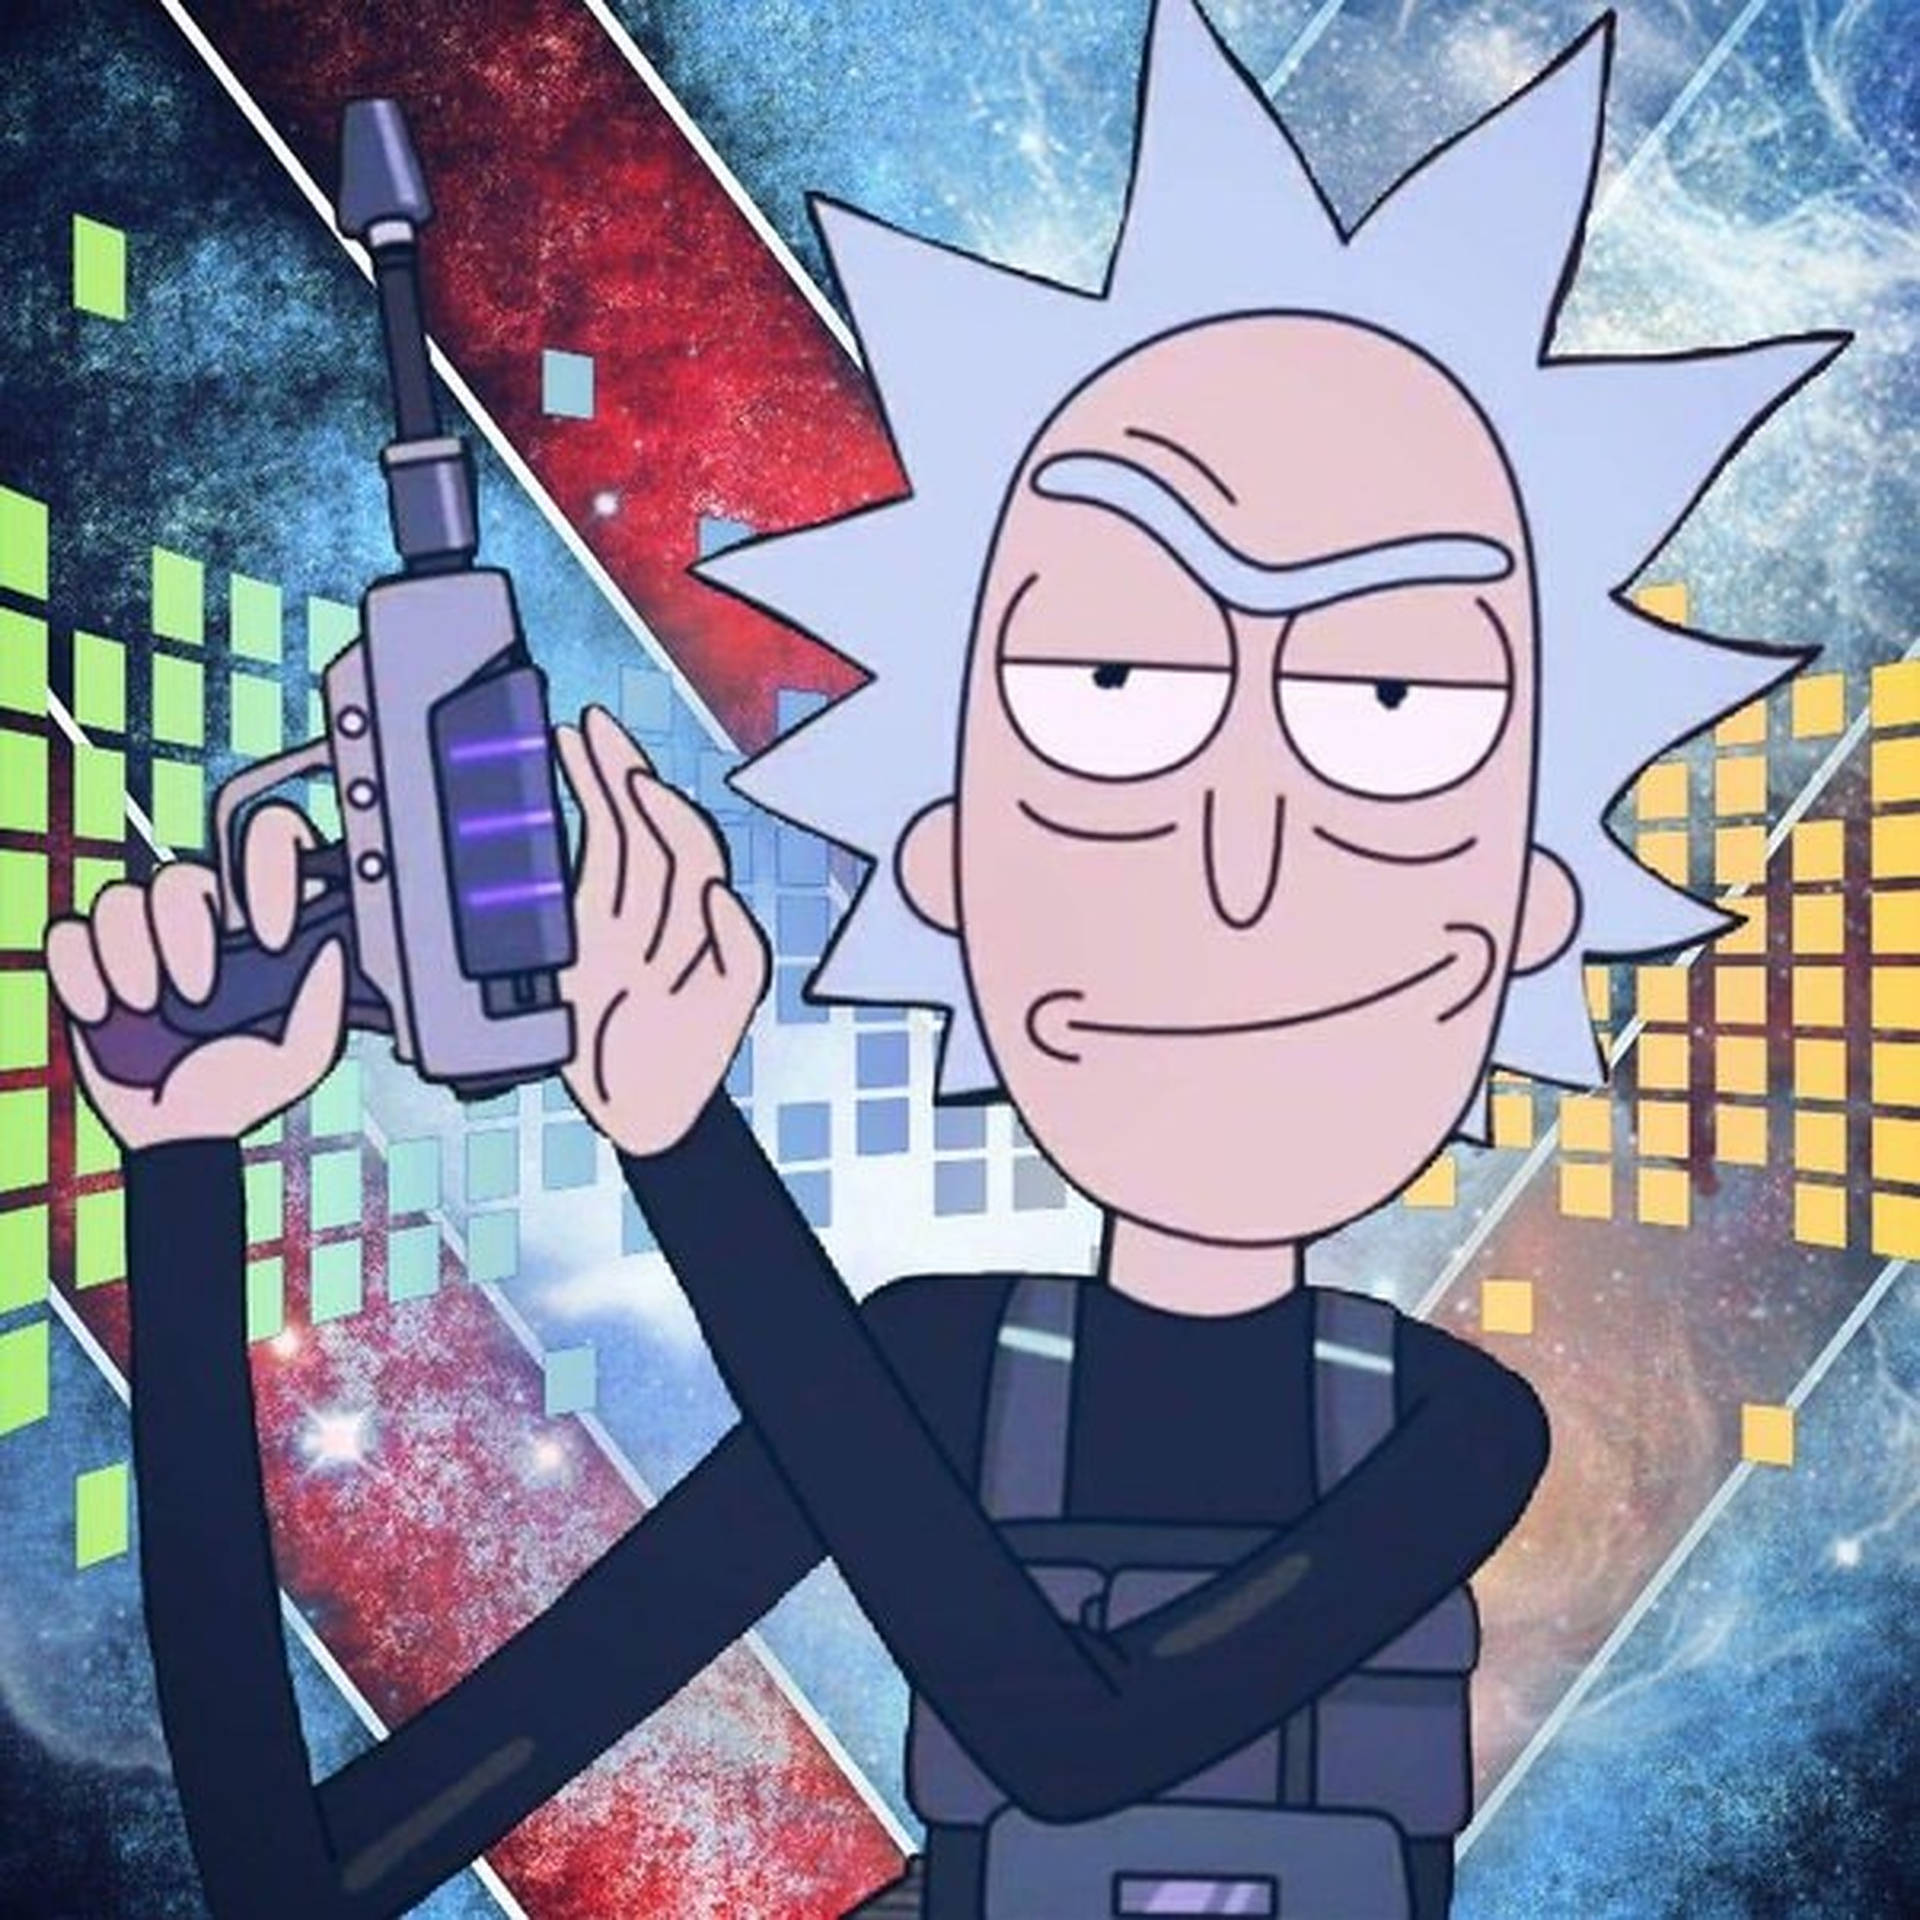 Rick From Rick And Morty In Vibrant Colors Background